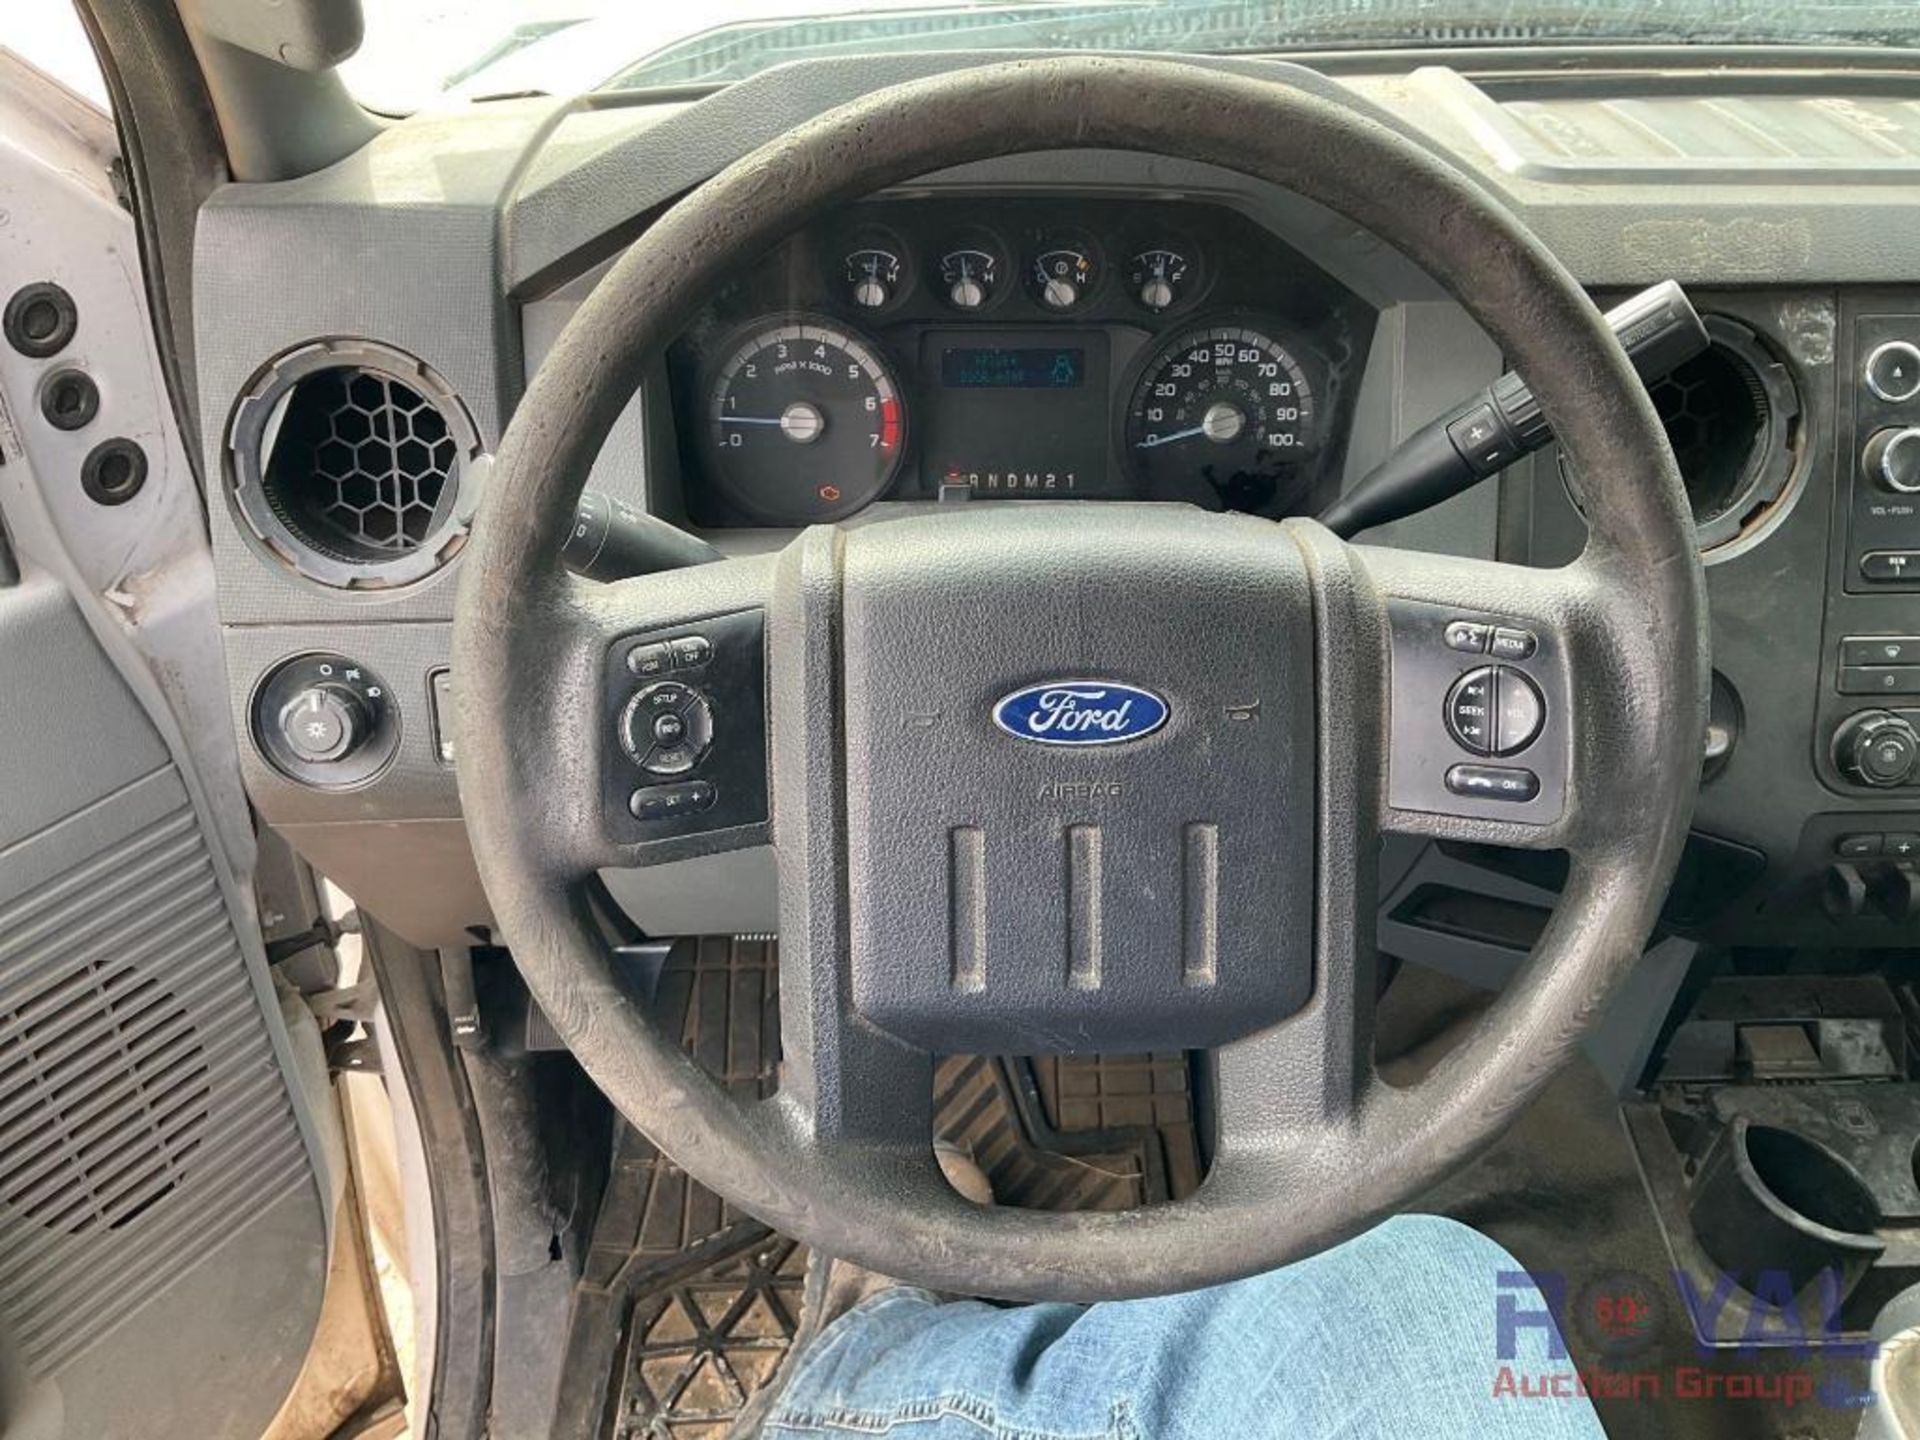 2016 Ford F250 Crew Cab Pickup Truck - Image 22 of 27